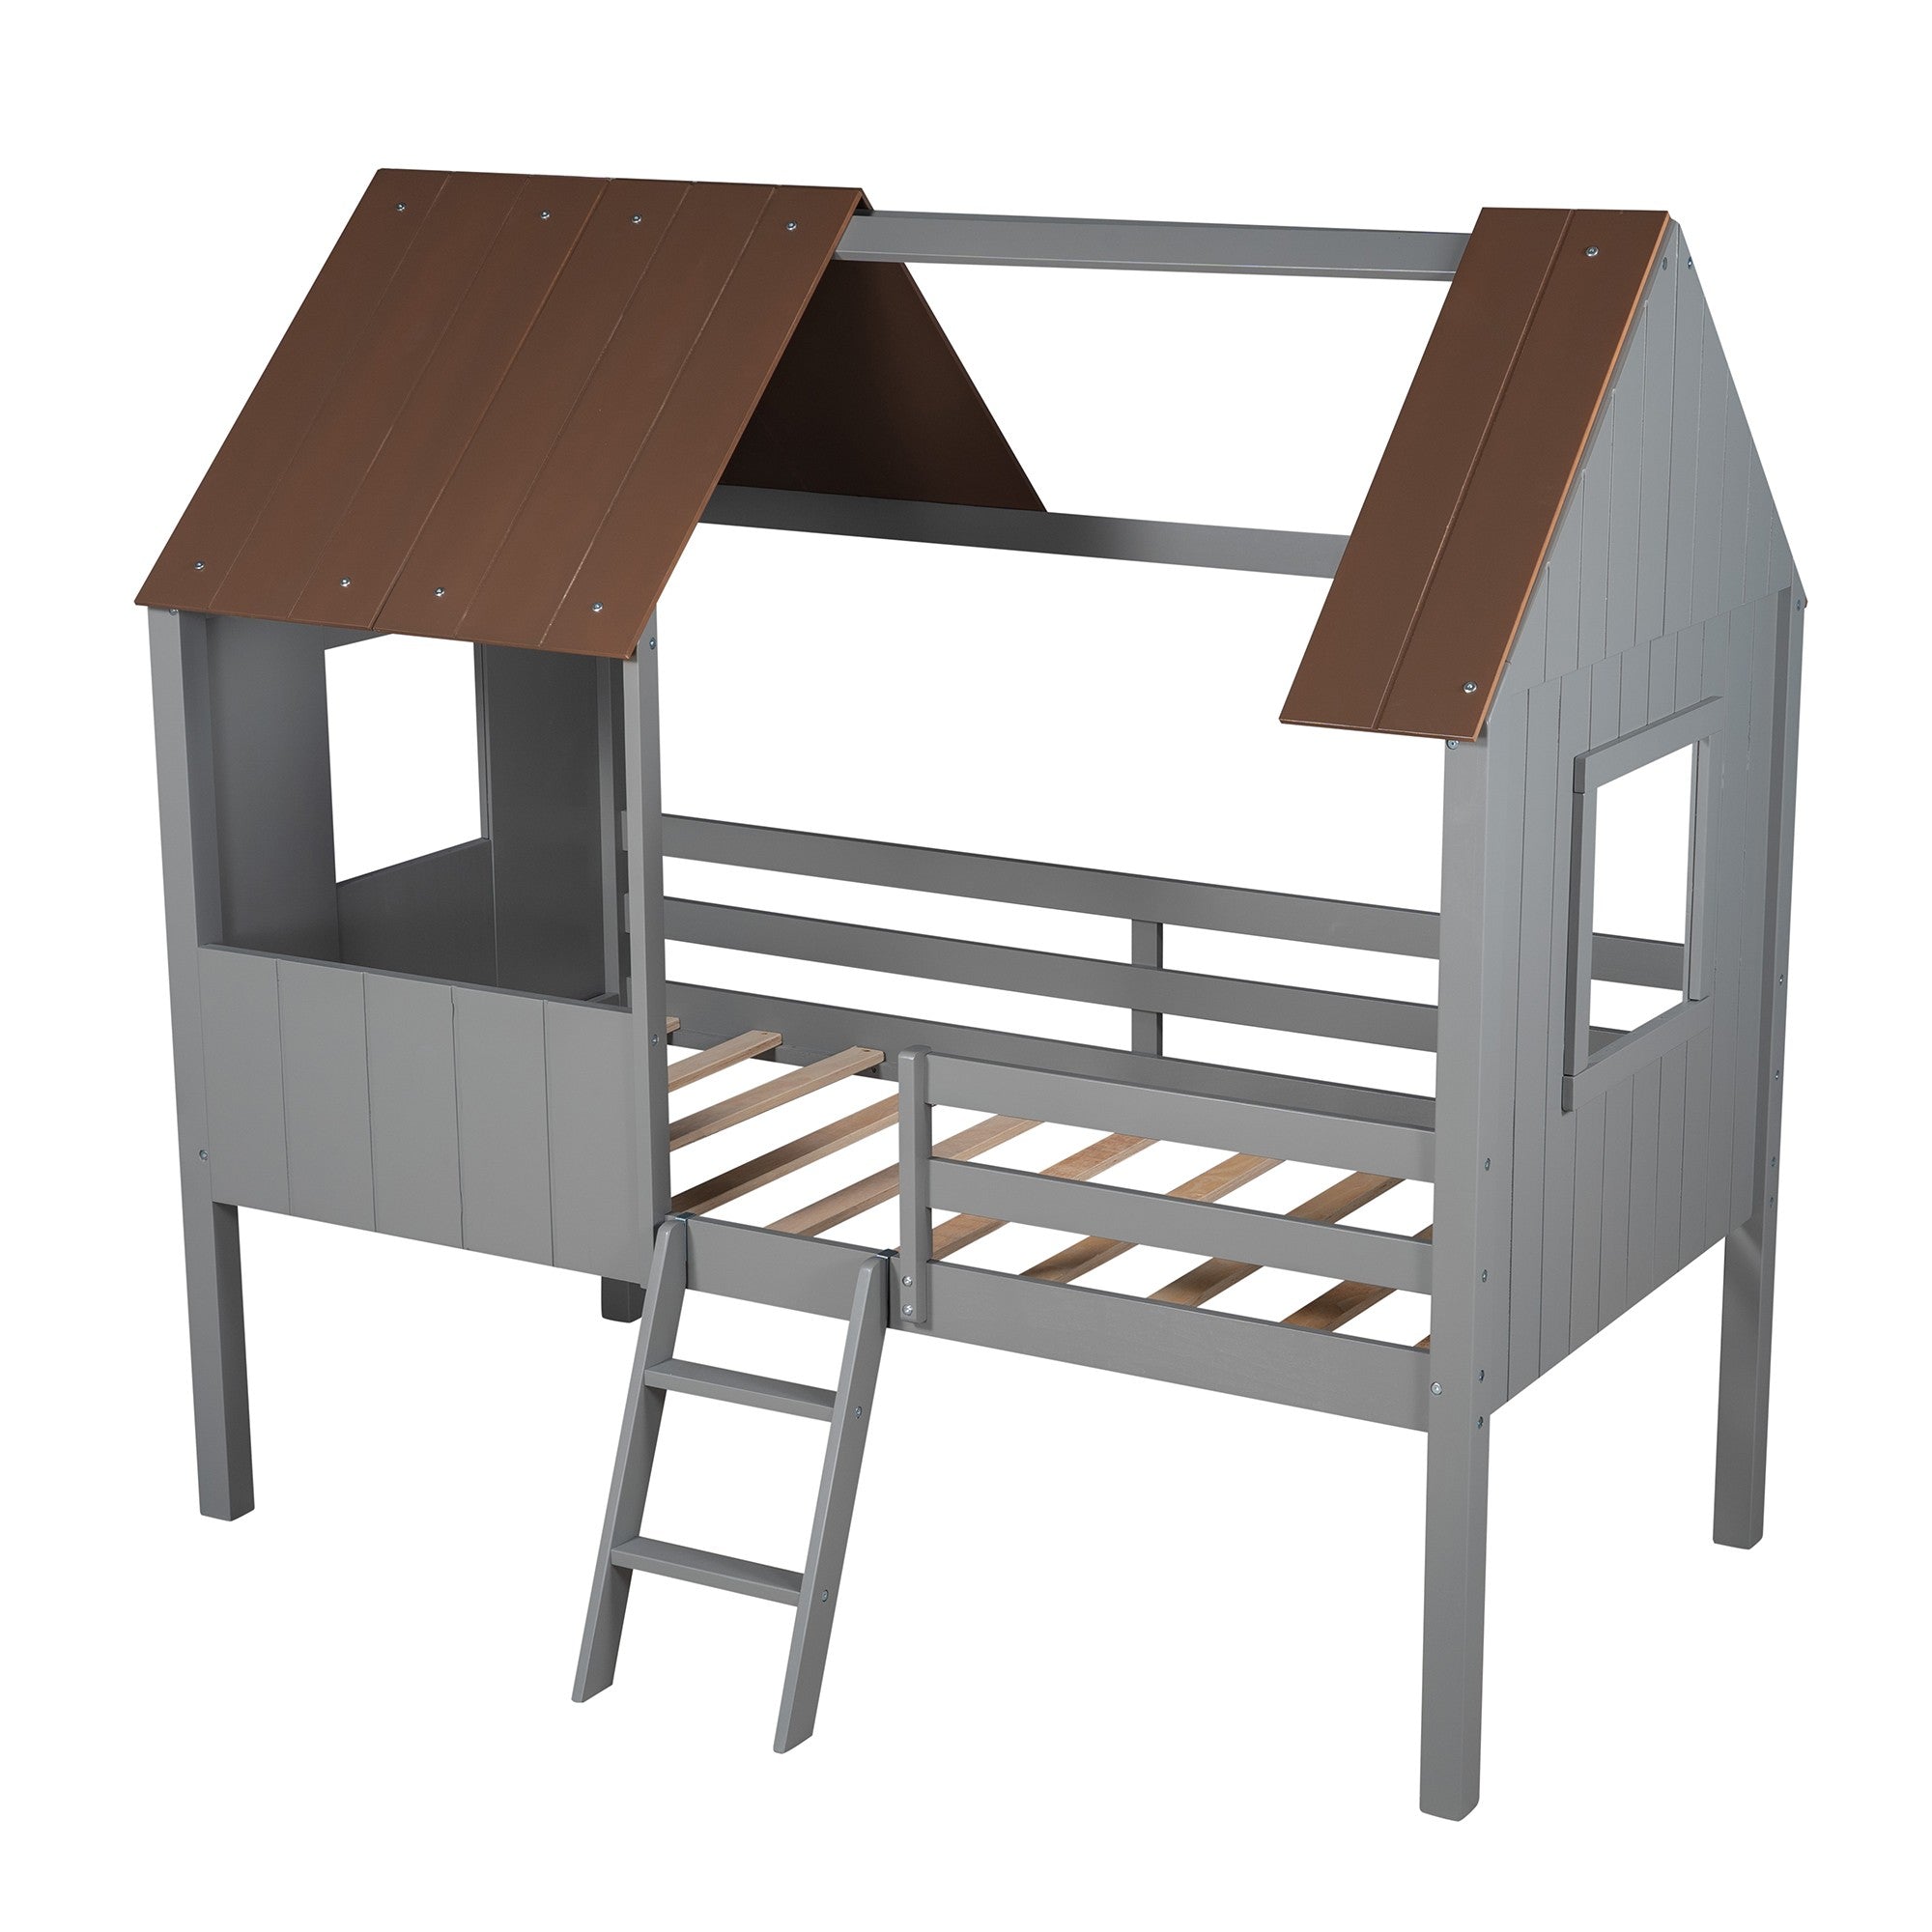 Playhouse with Windows and Partial Roof Antique Gray Twin Size Loft Bed